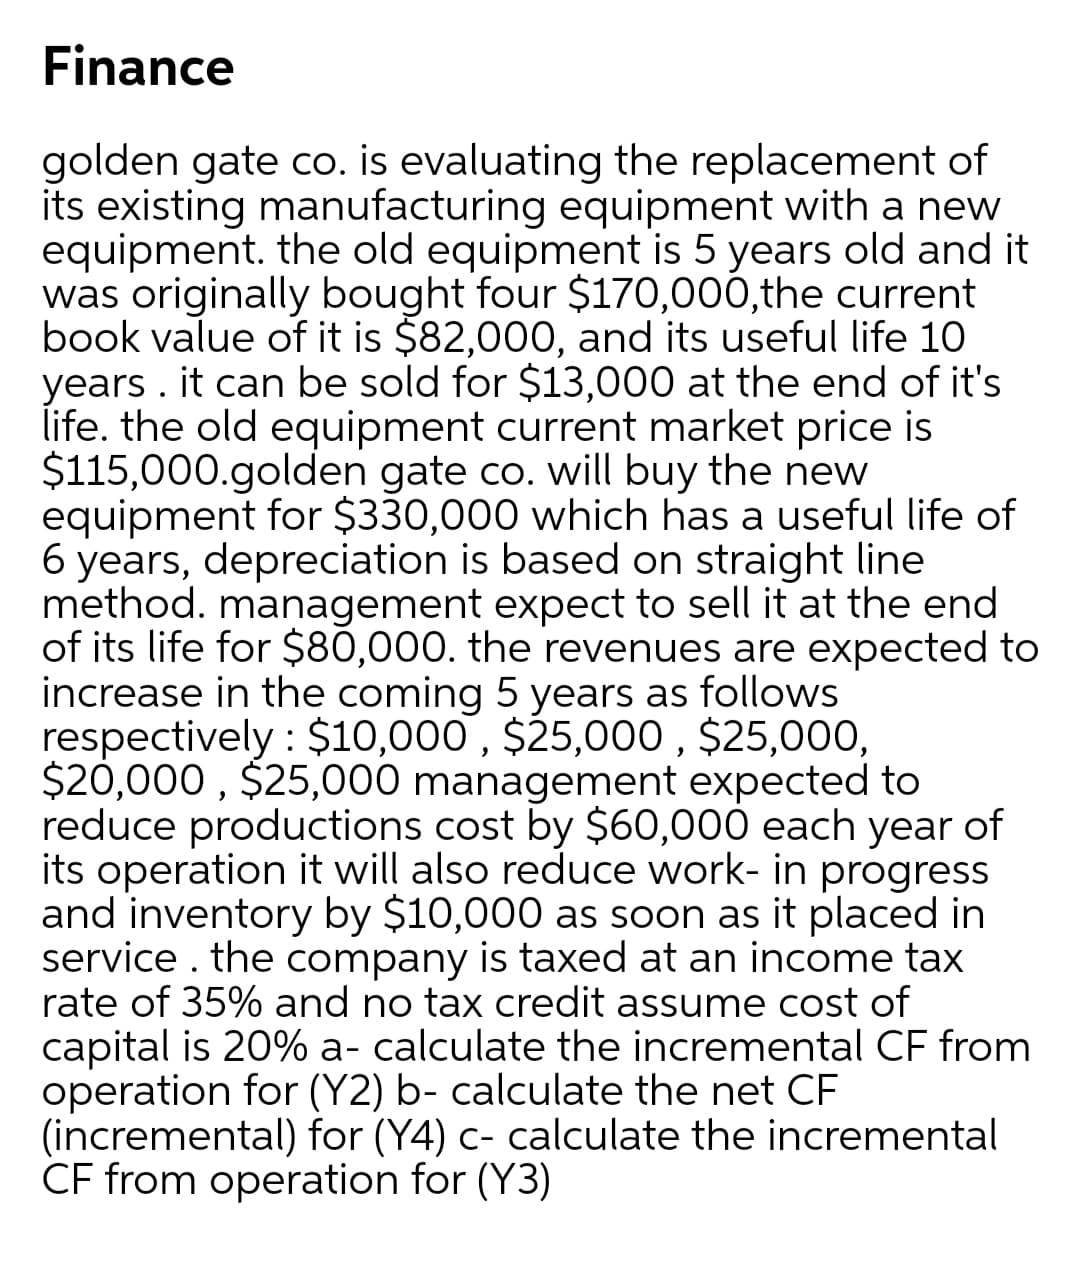 Finance
golden gate co. is evaluating the replacement of
its existing manufacturing equipment with a new
equipment. the old equipment is 5 years old and it
was originally bought four $170,000,the current
book value of it is $82,000, and its useful life 10
years . it can be sold for $13,000 at the end of it's
life. the old equipment current market price is
$115,000.golden gate co. will buy the new
equipment for $330,000 which has a useful life of
6 years, depreciation is based on straight line
method. management expect to sell it at the end
of its life for $80,000. the revenues are expected to
increase in the coming 5 years as follows
respectively : $10,000 , $25,000 , $25,000,
$20,000 , $25,000 management expected to
reduce productions cost by $60,000 each year of
its operation it will also reduce work- in progress
and inventory by $10,000 as soon as it placed in
service . the company is taxed at an income tax
rate of 35% and no tax credit assume cost of
capital is 20% a- calculate the incremental CF from
operation for (Y2) b- calculate the net CF
(incremental) for (Y4) c- calculate the incremental
CF from operation for (Y3)
